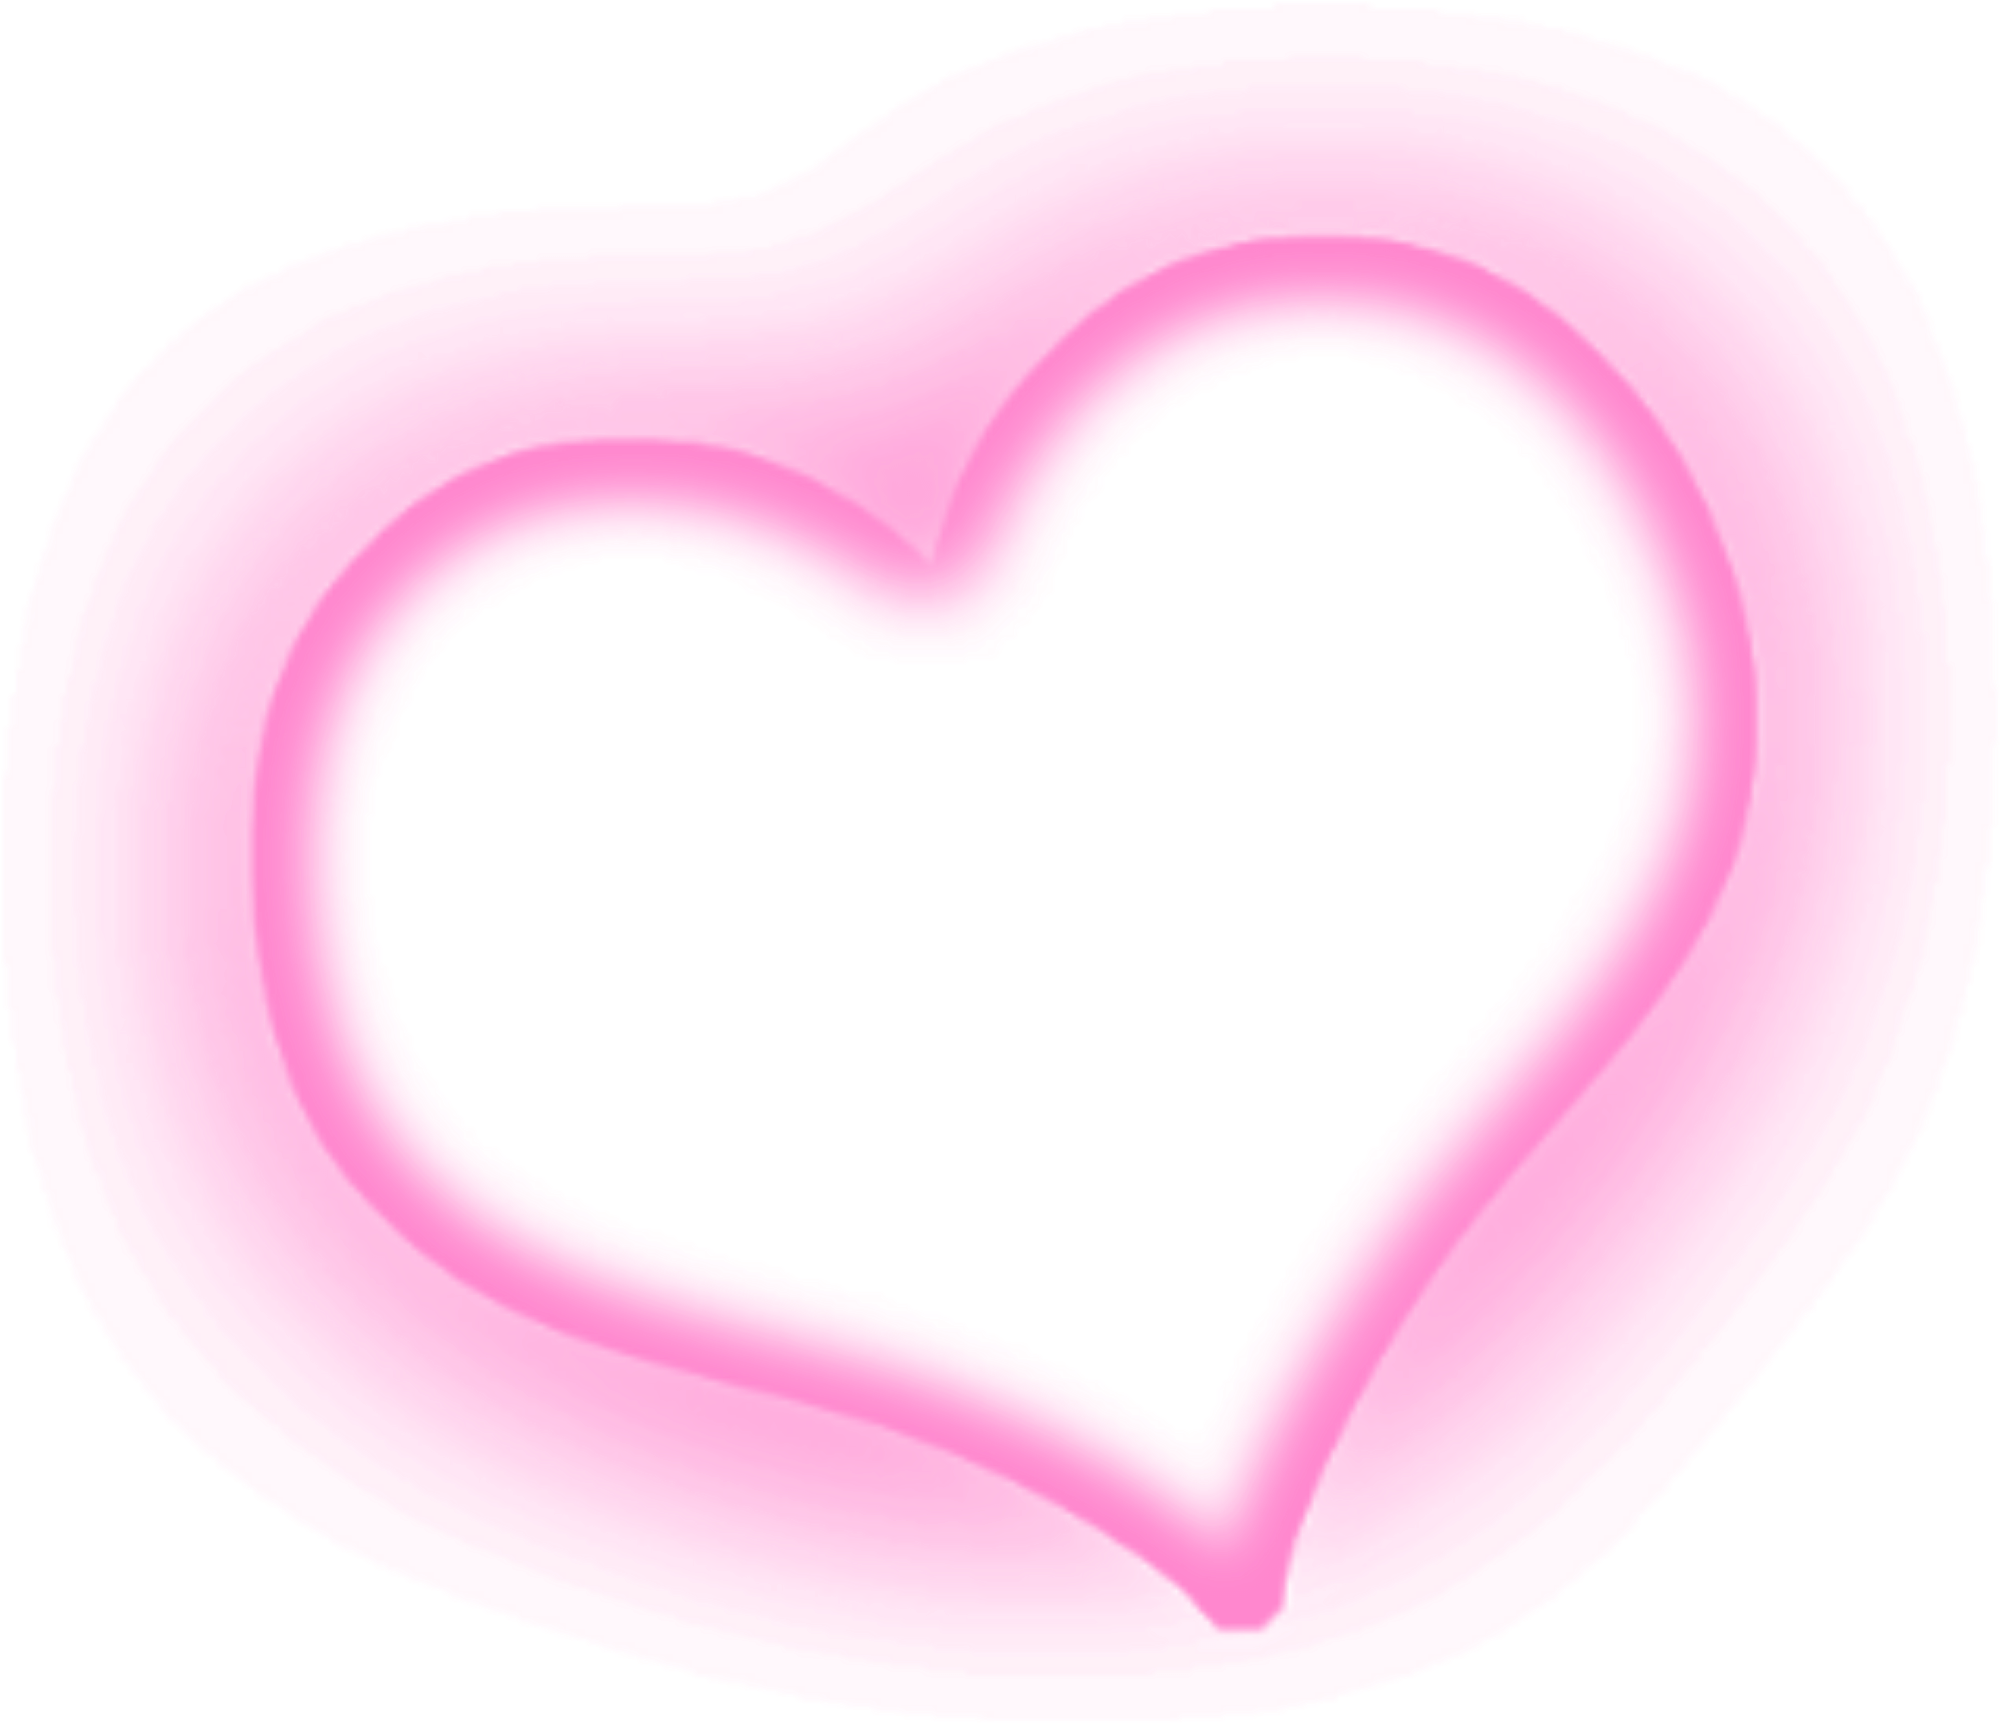 List 95+ Background Images Picture Of A Pink Heart Completed